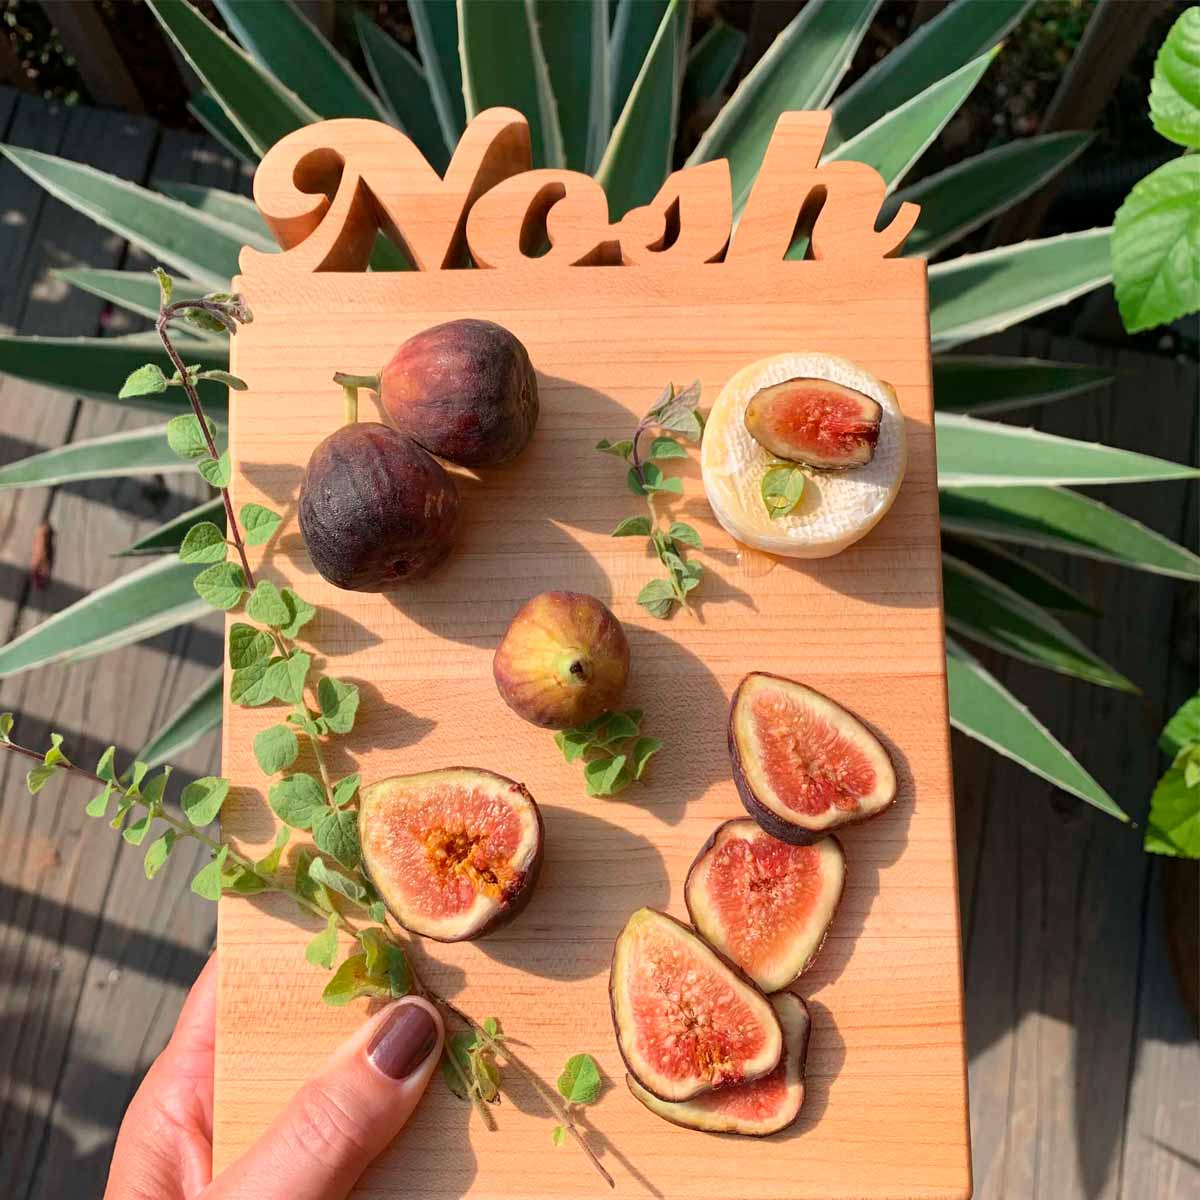 Cutting board with the work Nosh cut out of the wood - shown this figs and cheese